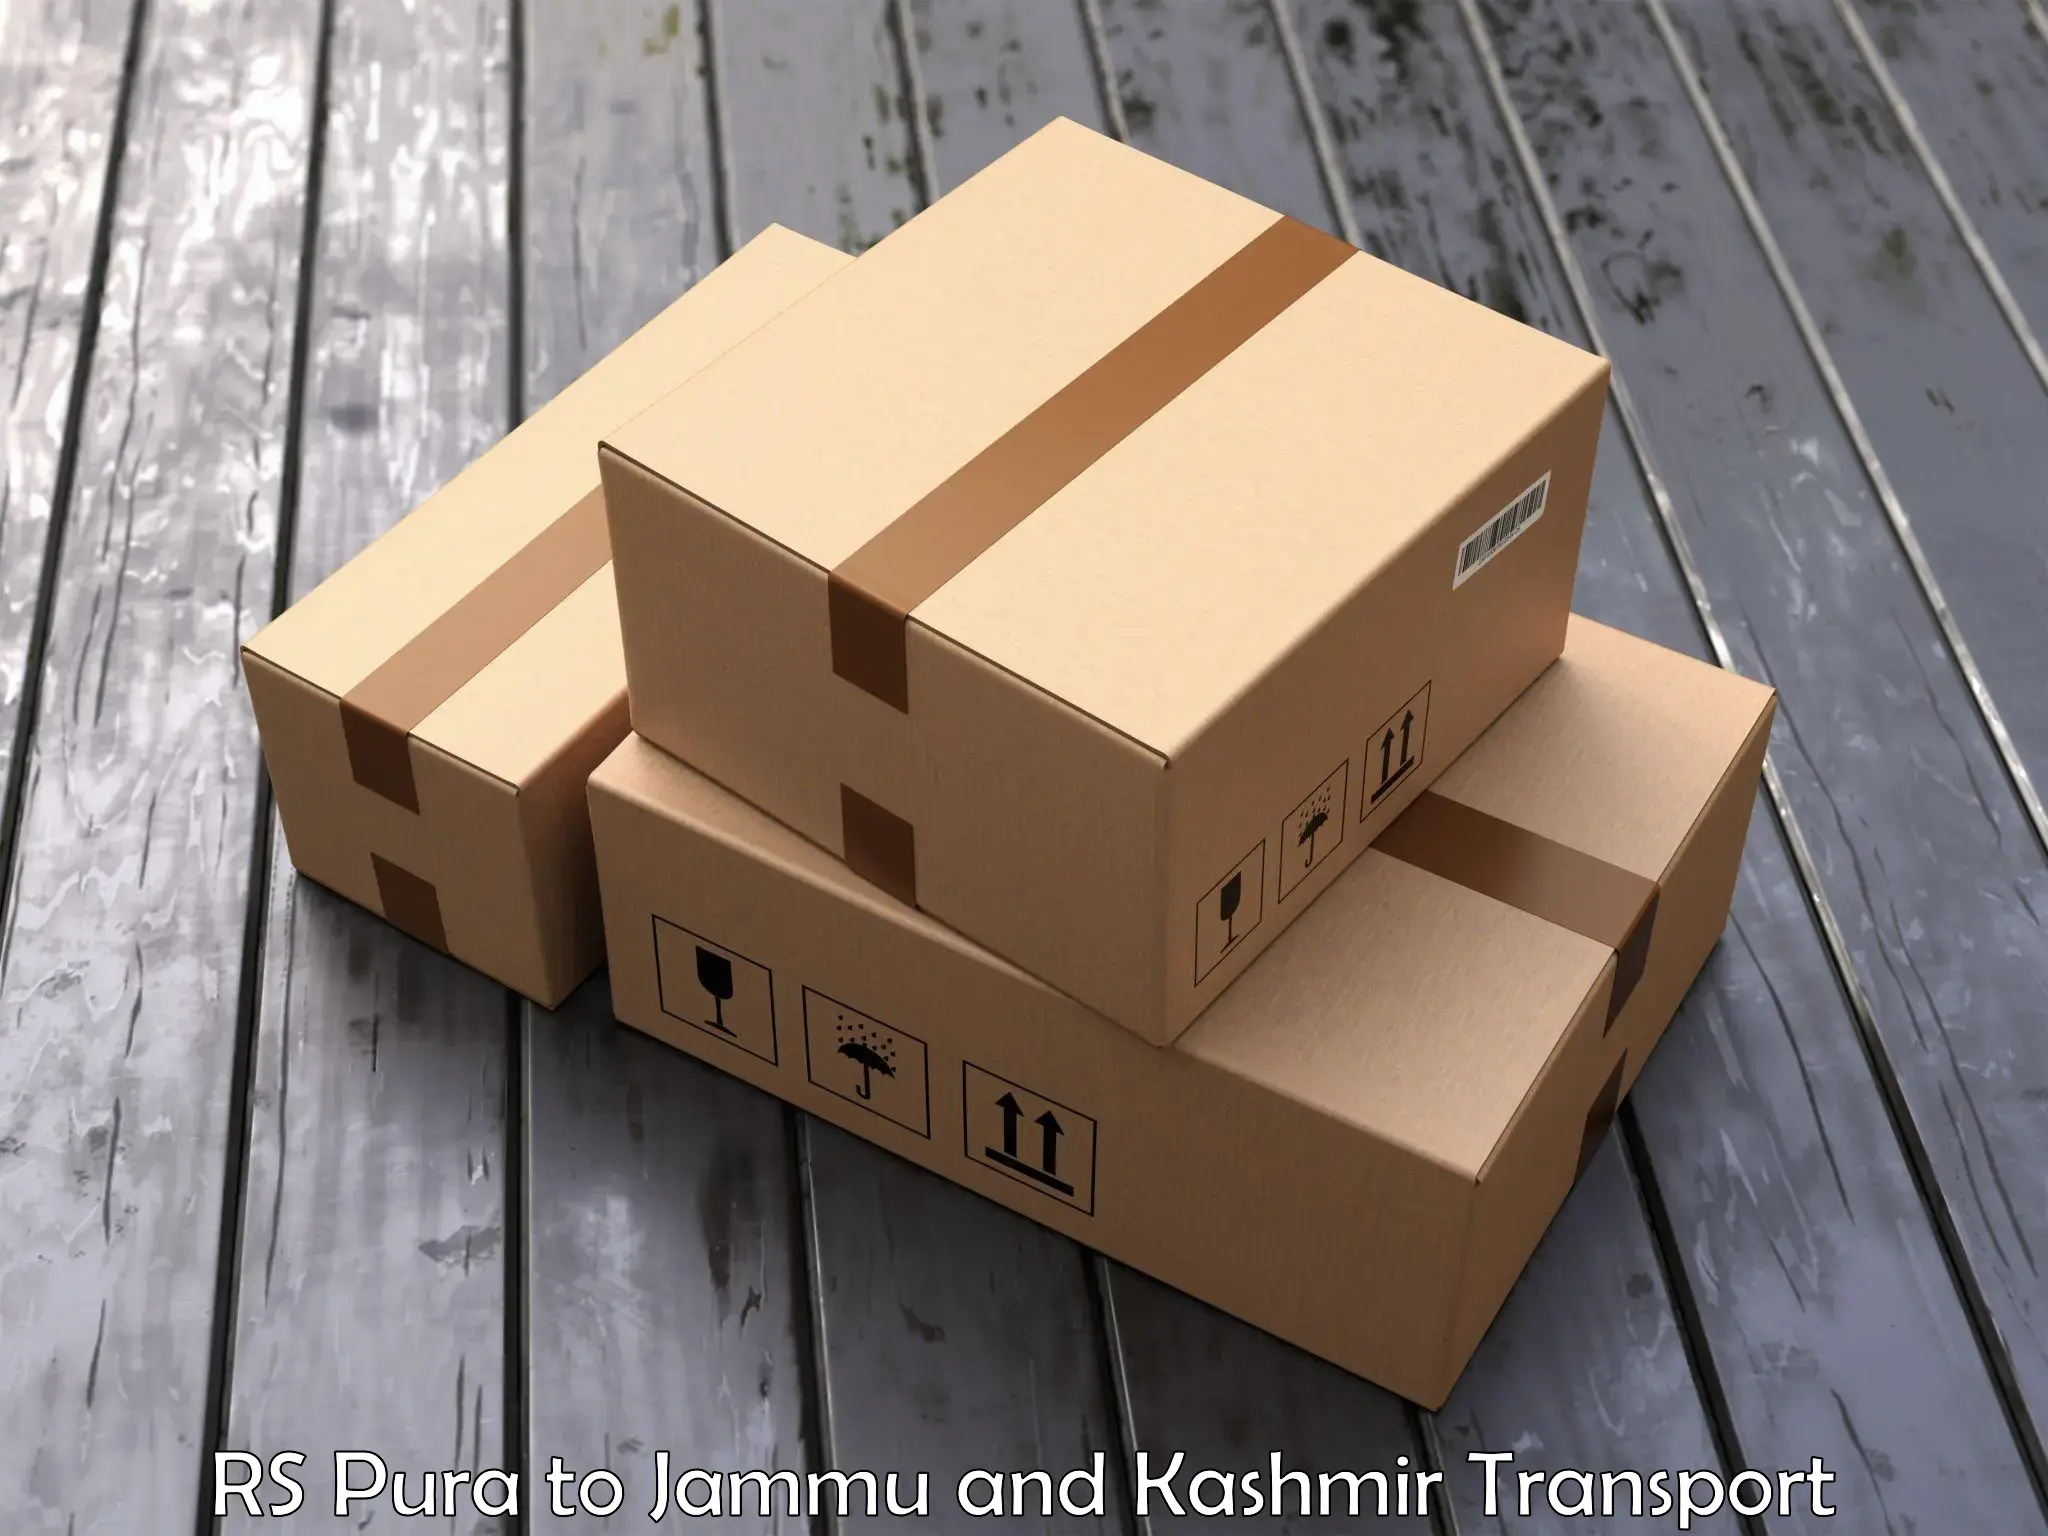 Air freight transport services in RS Pura to Jammu and Kashmir